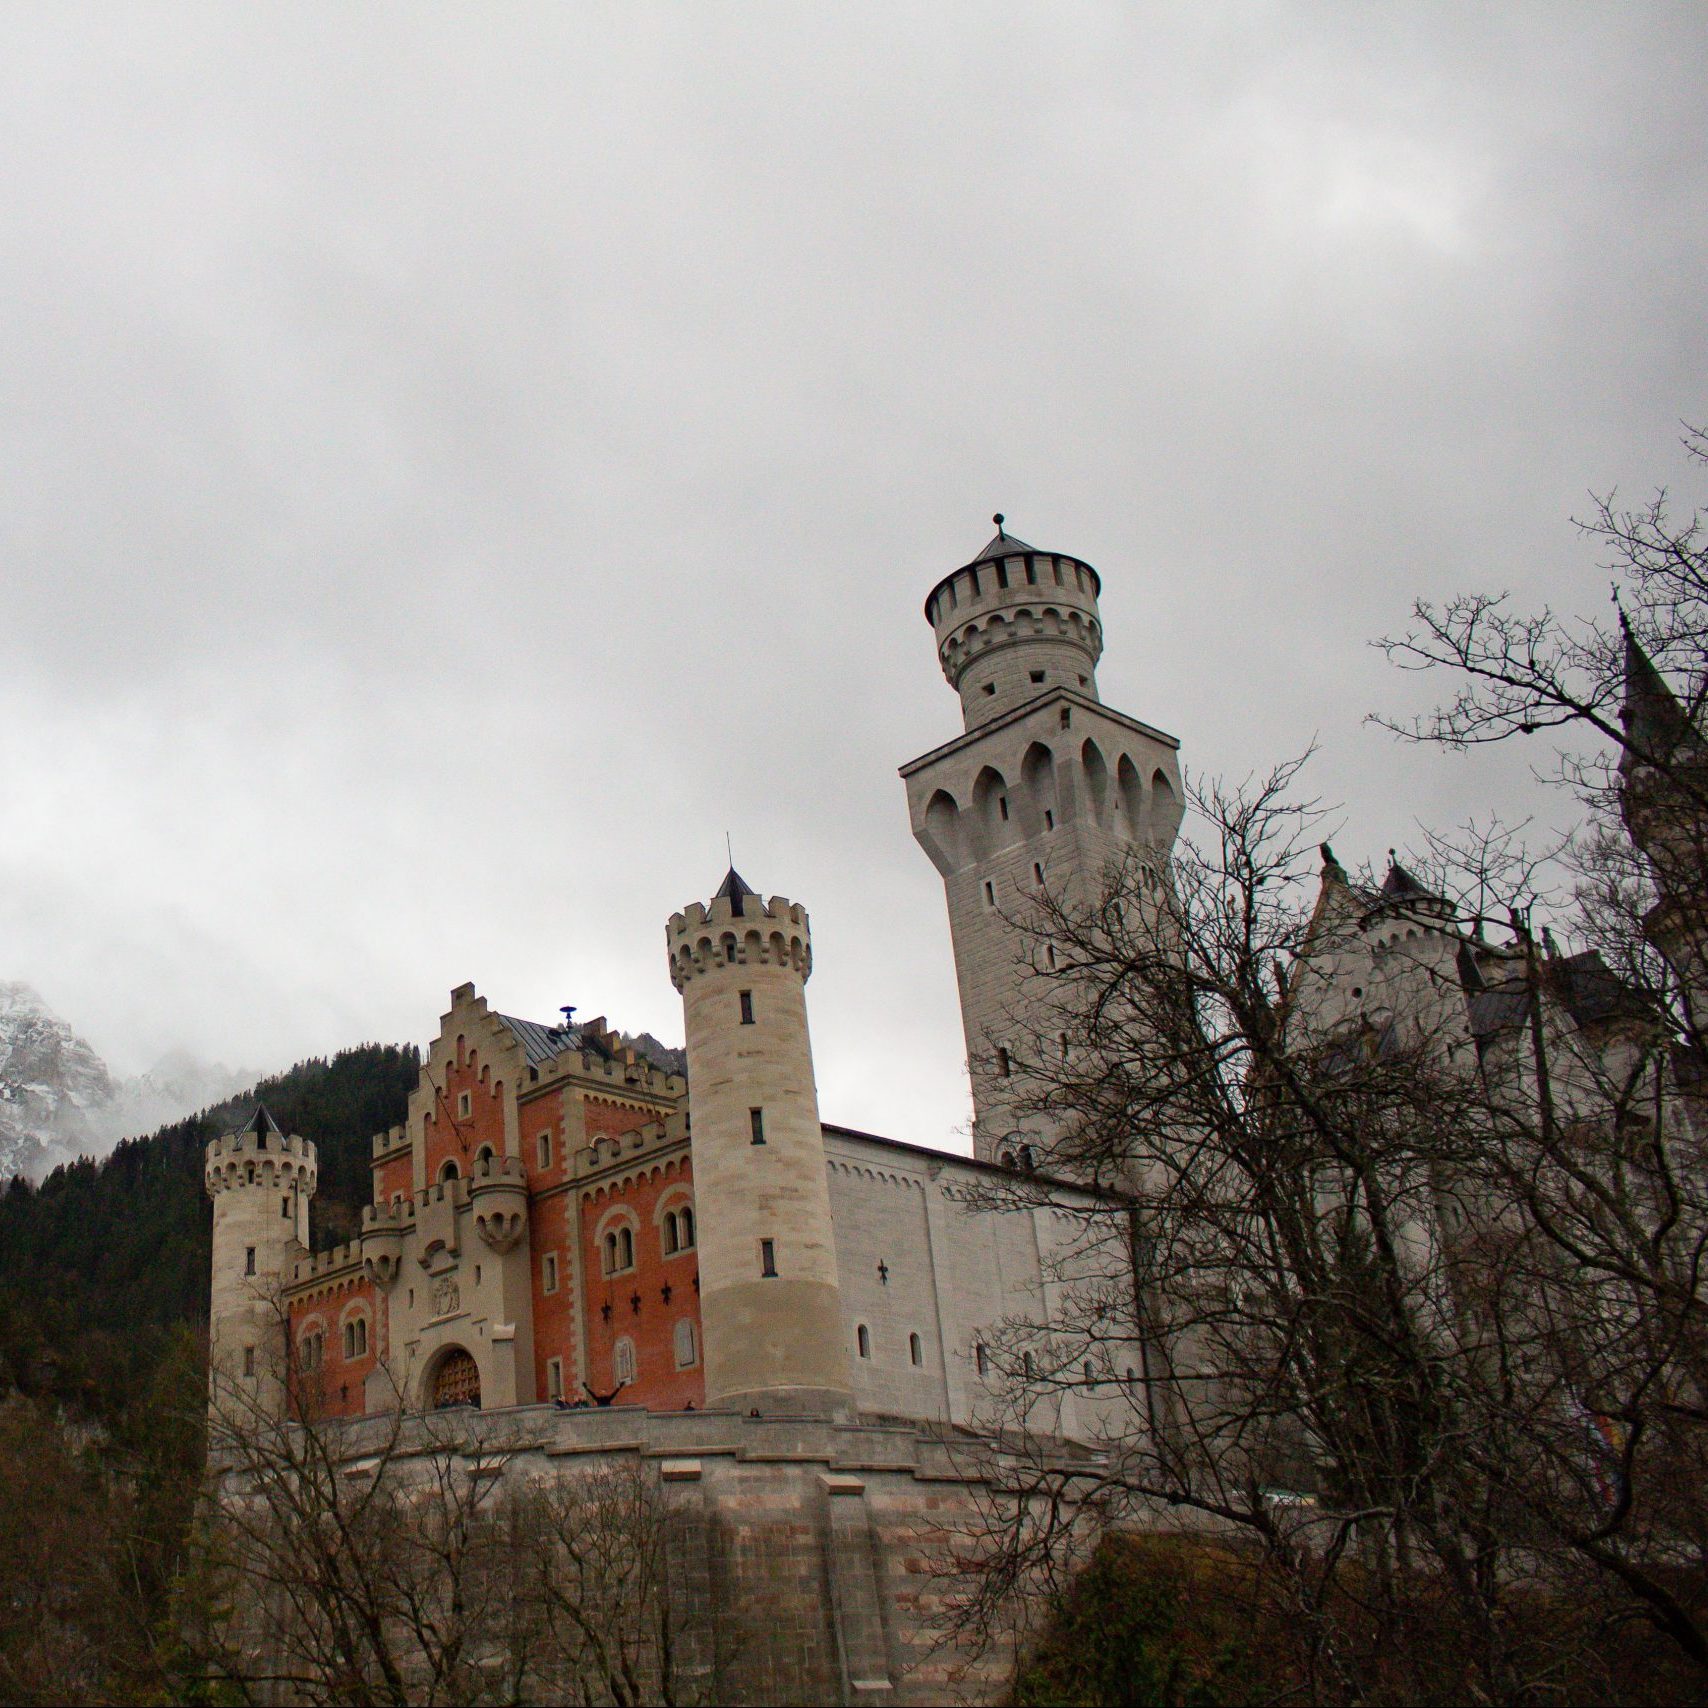 The best way to explore Bavarian castles!